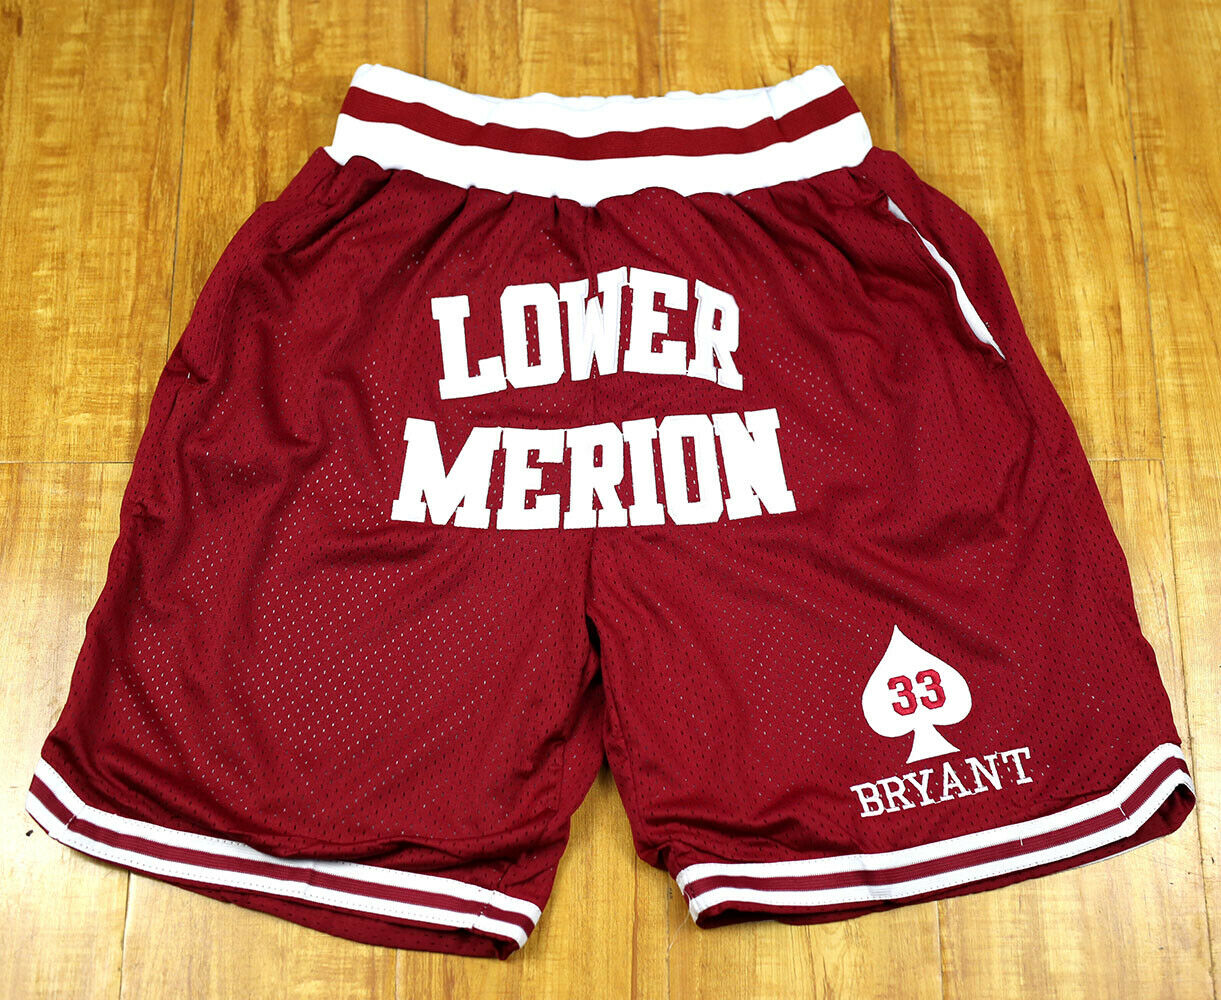 Kobe Bryant #33 Lower Merion Basketball Shorts Stitched Streetball Shorts  Red